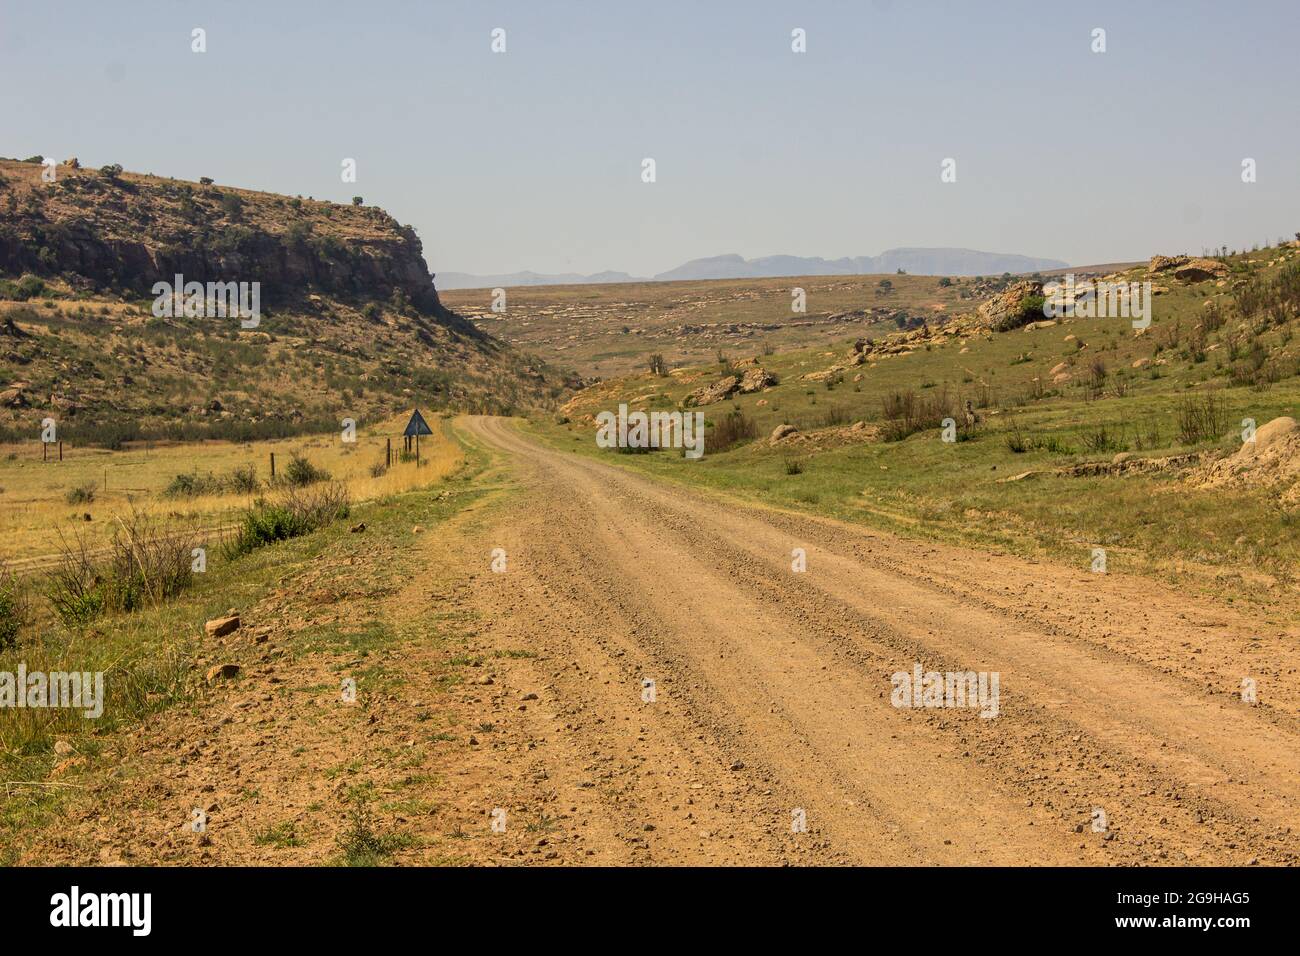 Dirt road travelling into the remote, rocky environment of the Free State Drakensberg Mountains of South Africa Stock Photo